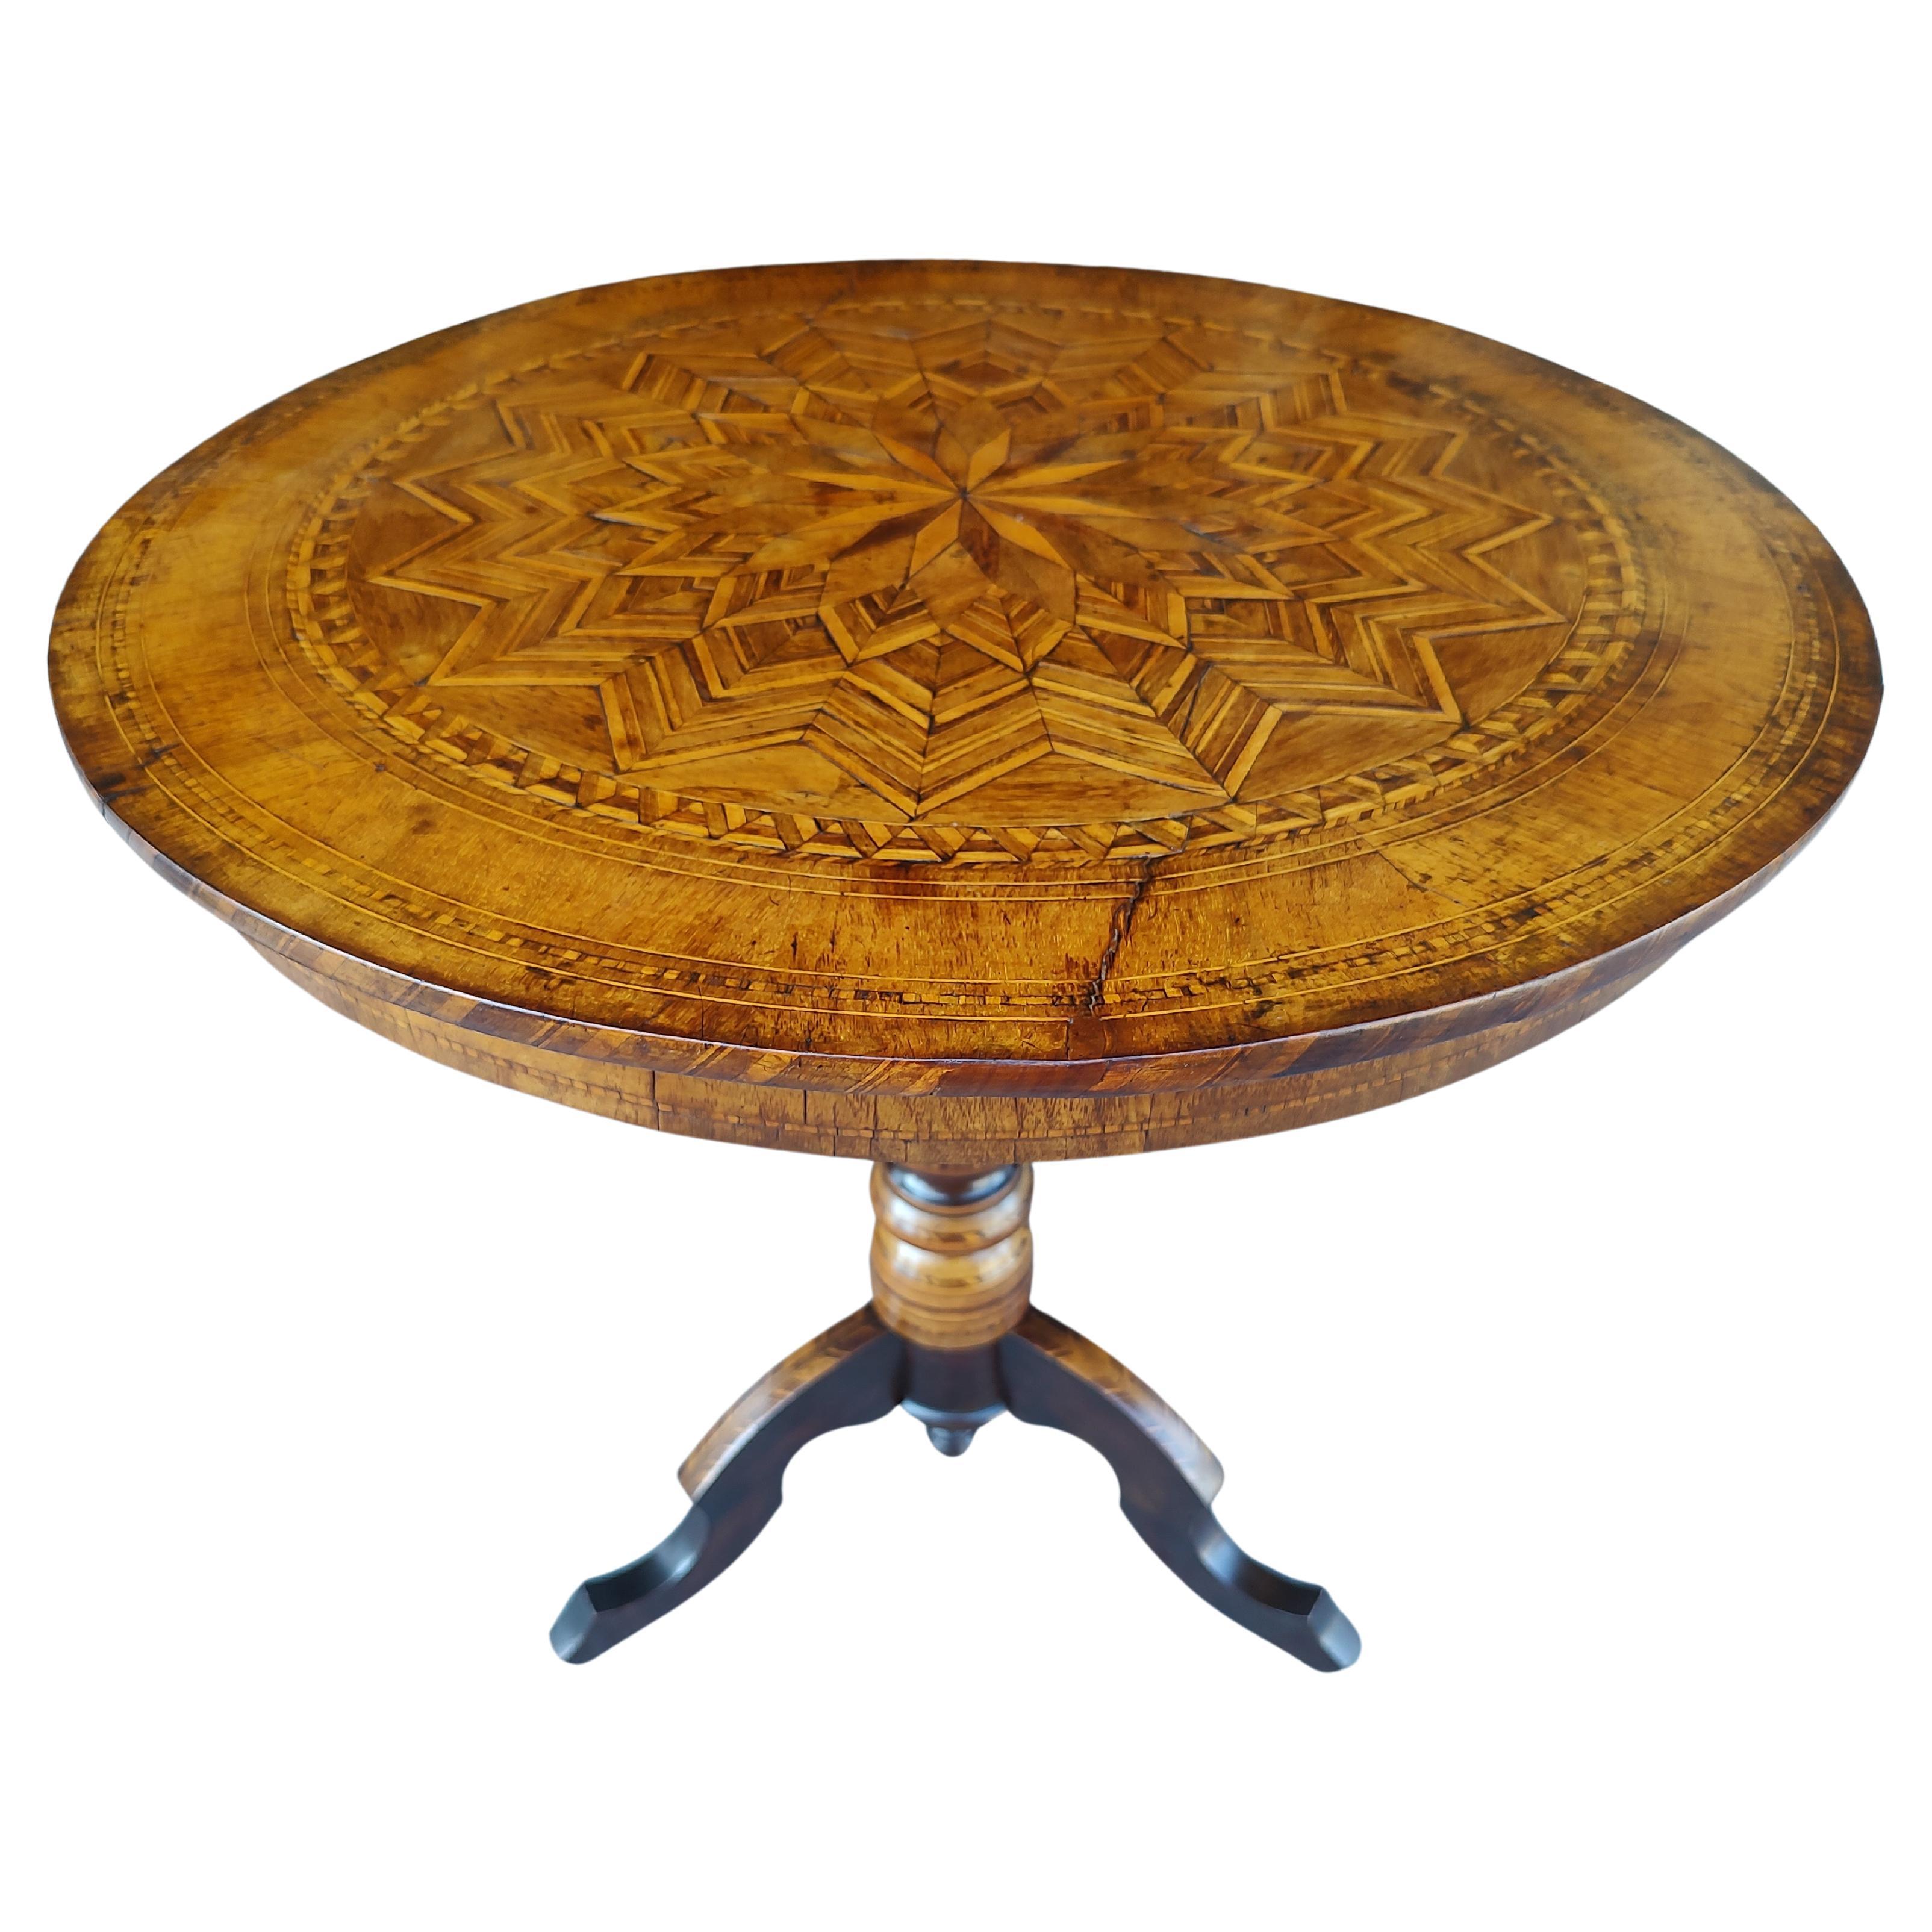 Early 19thc Italian Sorrento Table with Inlaid Marquetry  